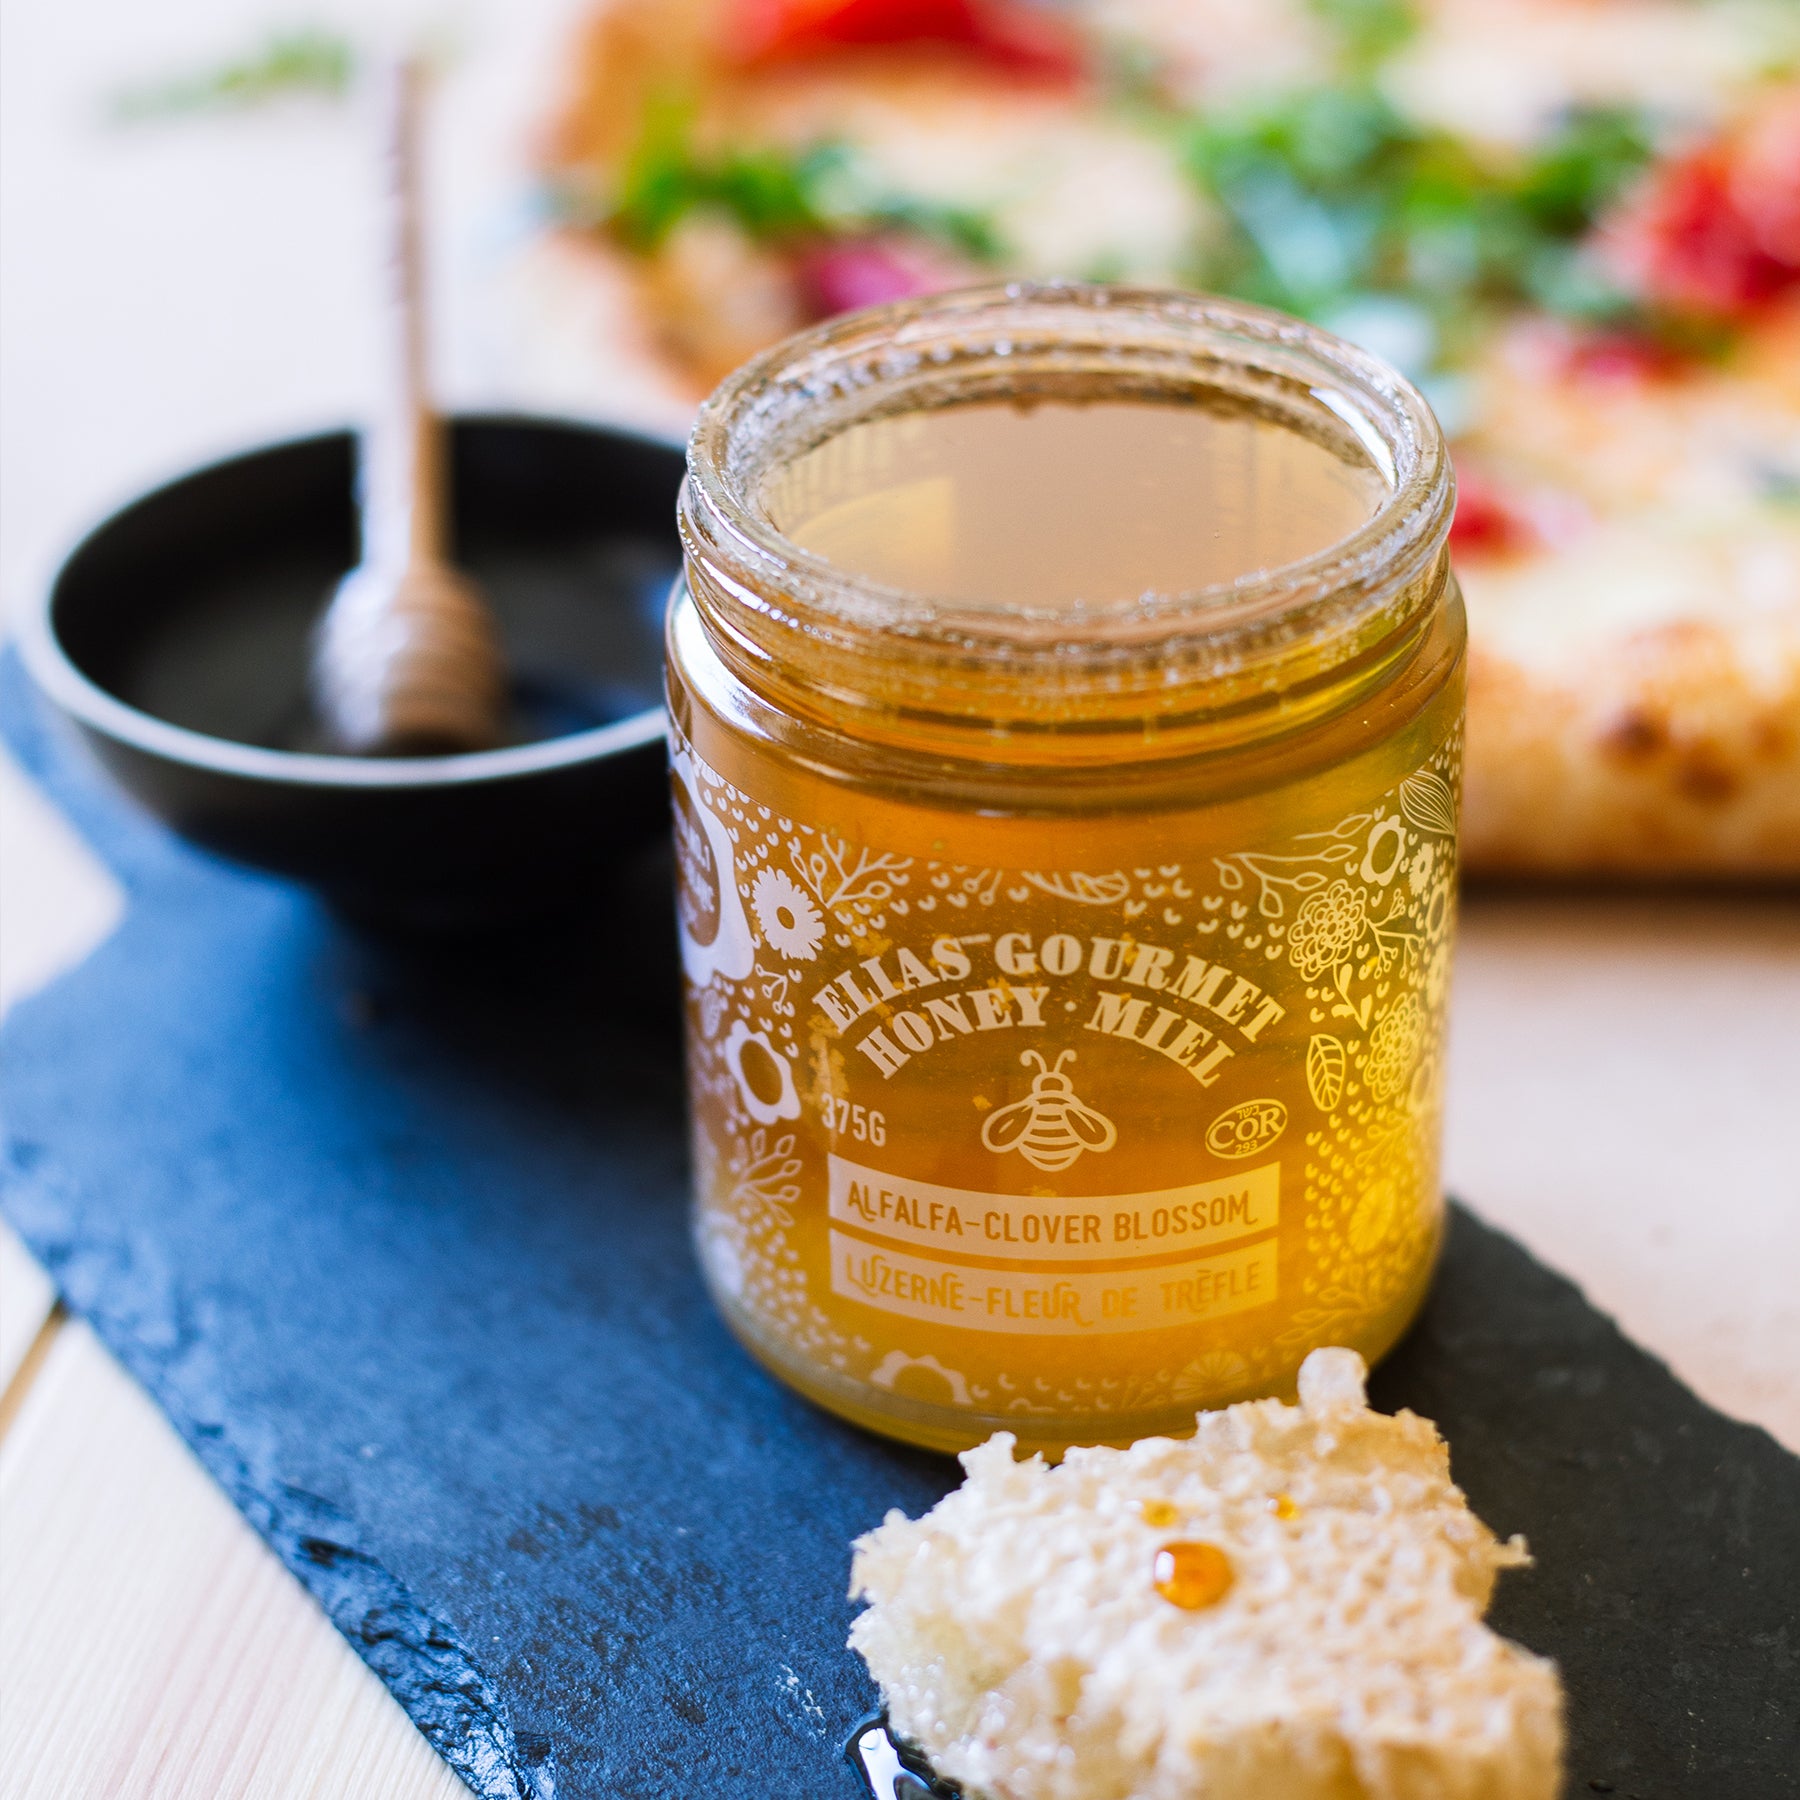 Image of Elias Gourmet Raw Alfalfa-Clover Blossom Honey in front of pizza and honey stick in bowl